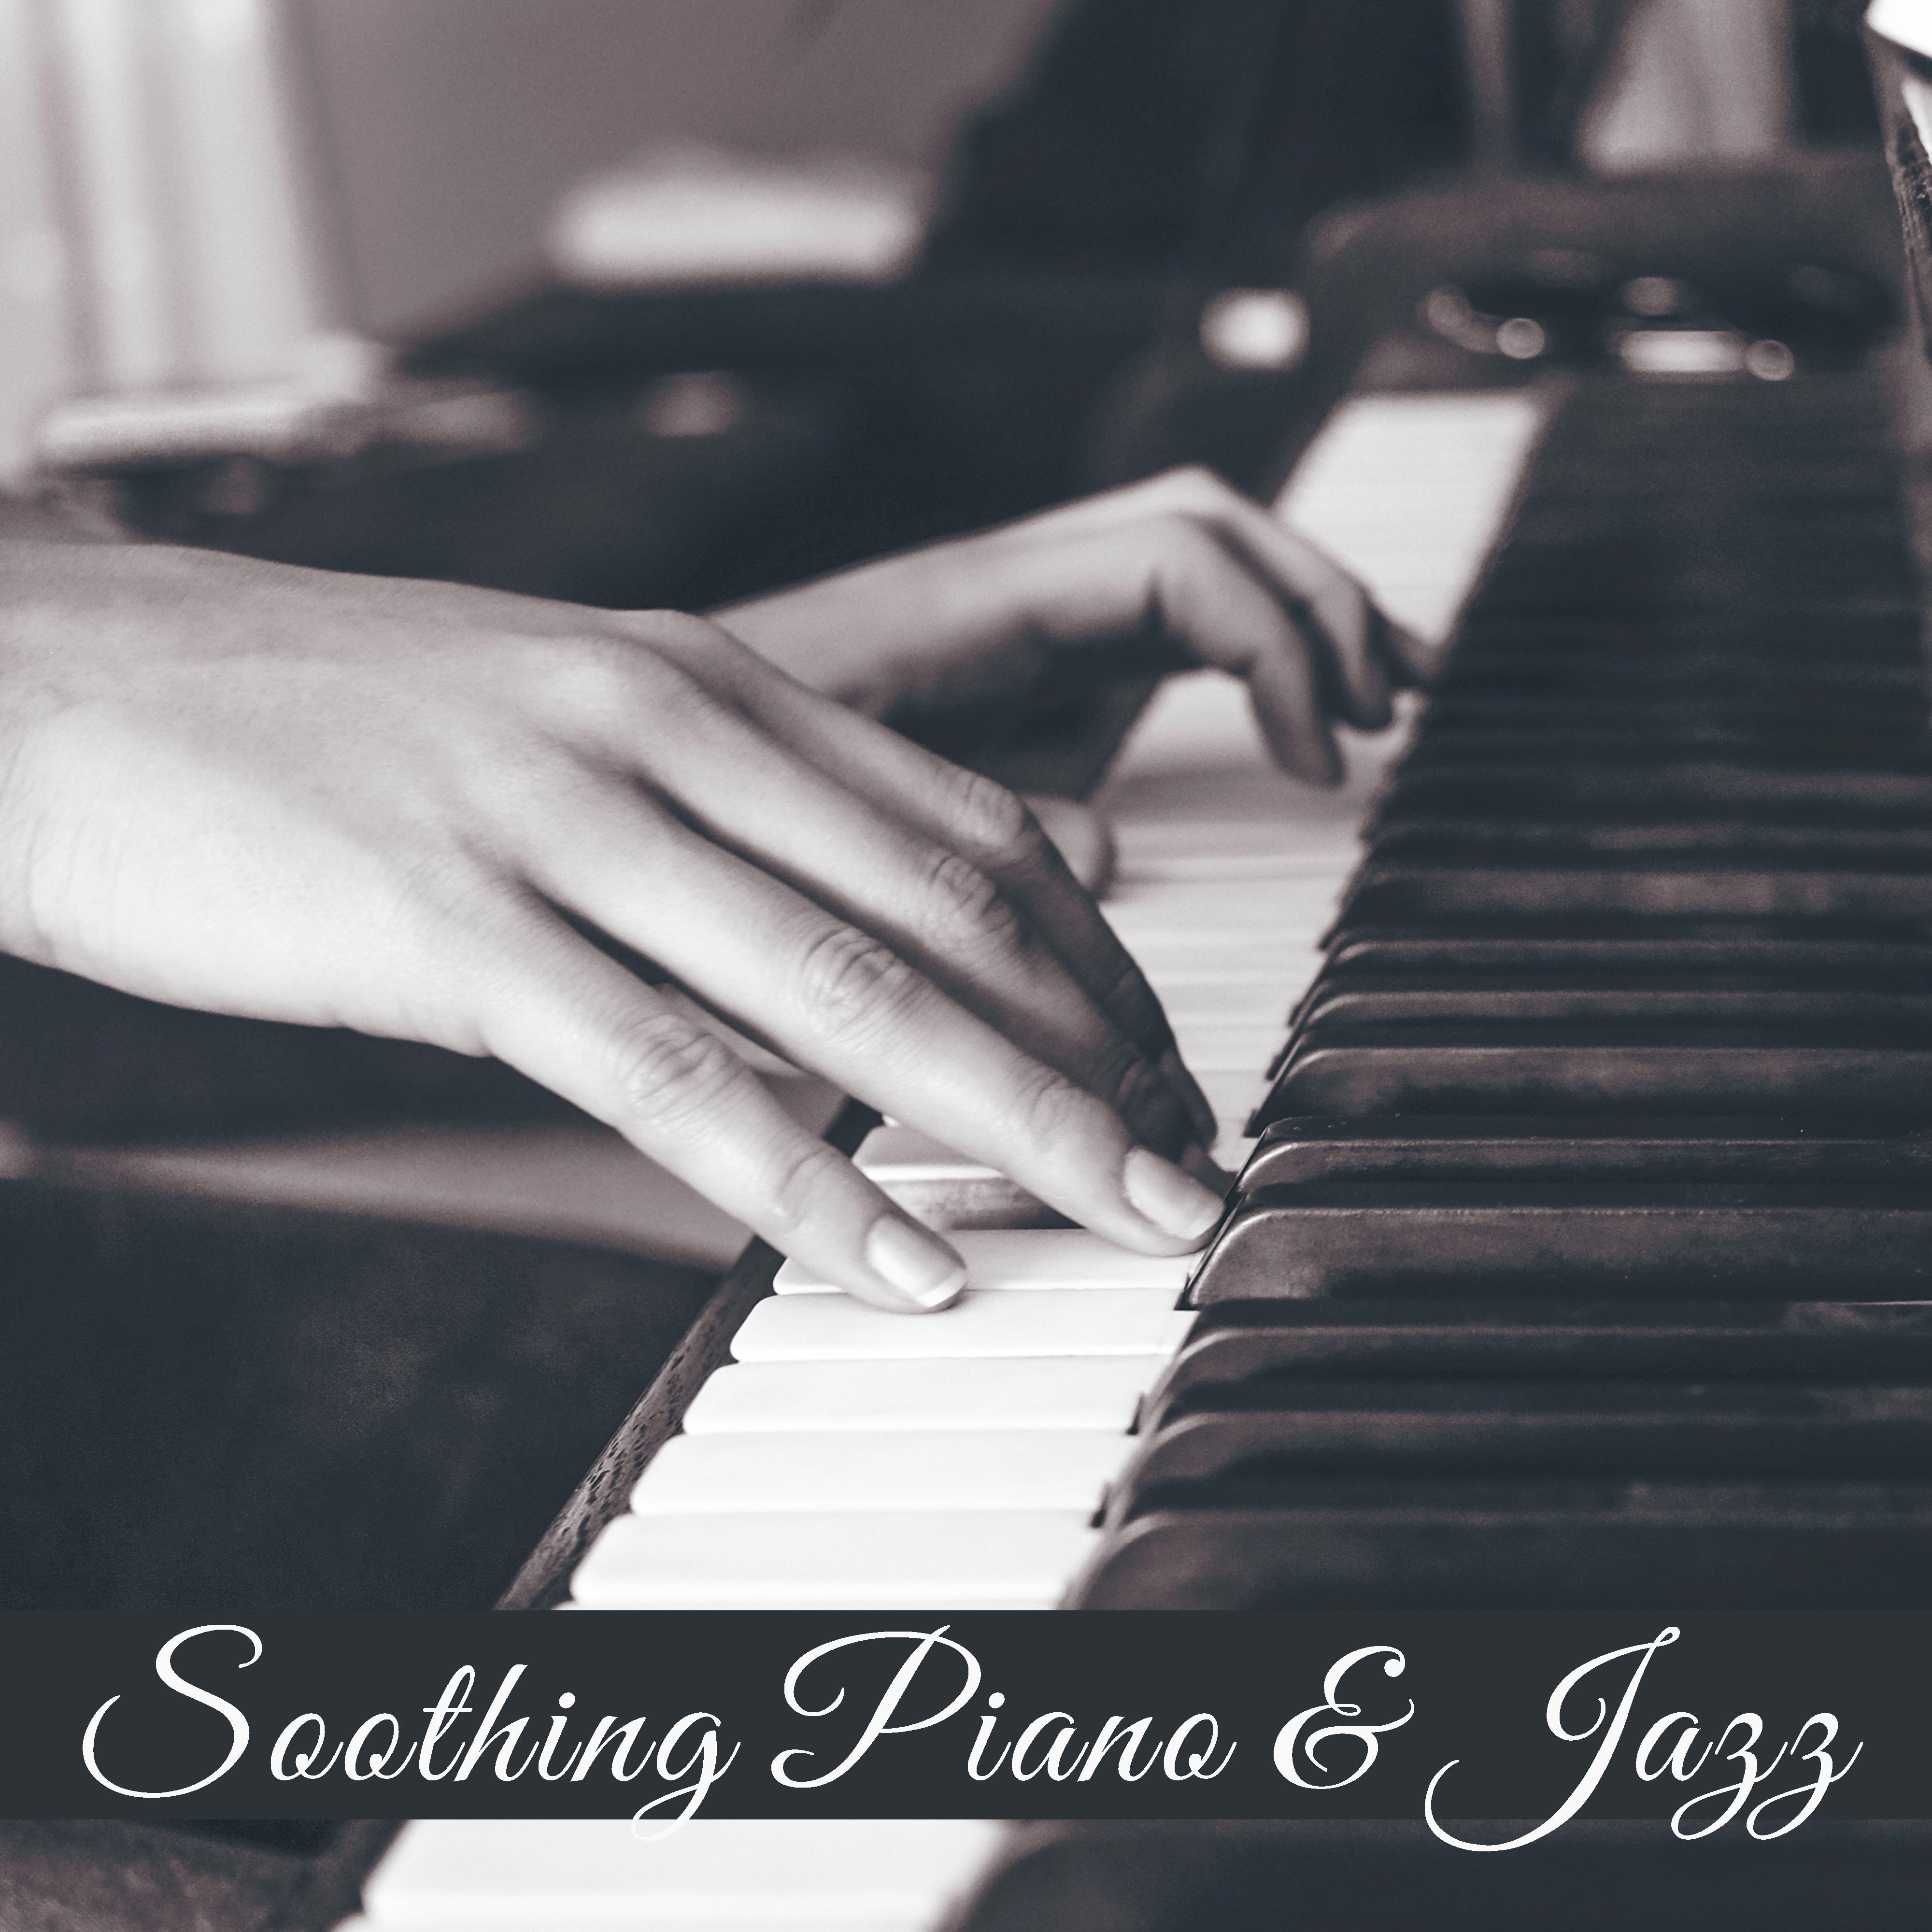 Soothing Piano & Jazz – Pure Sleep, Jazz for Rest, Deep Relief, Mellow Jazz, Gentle Sounds